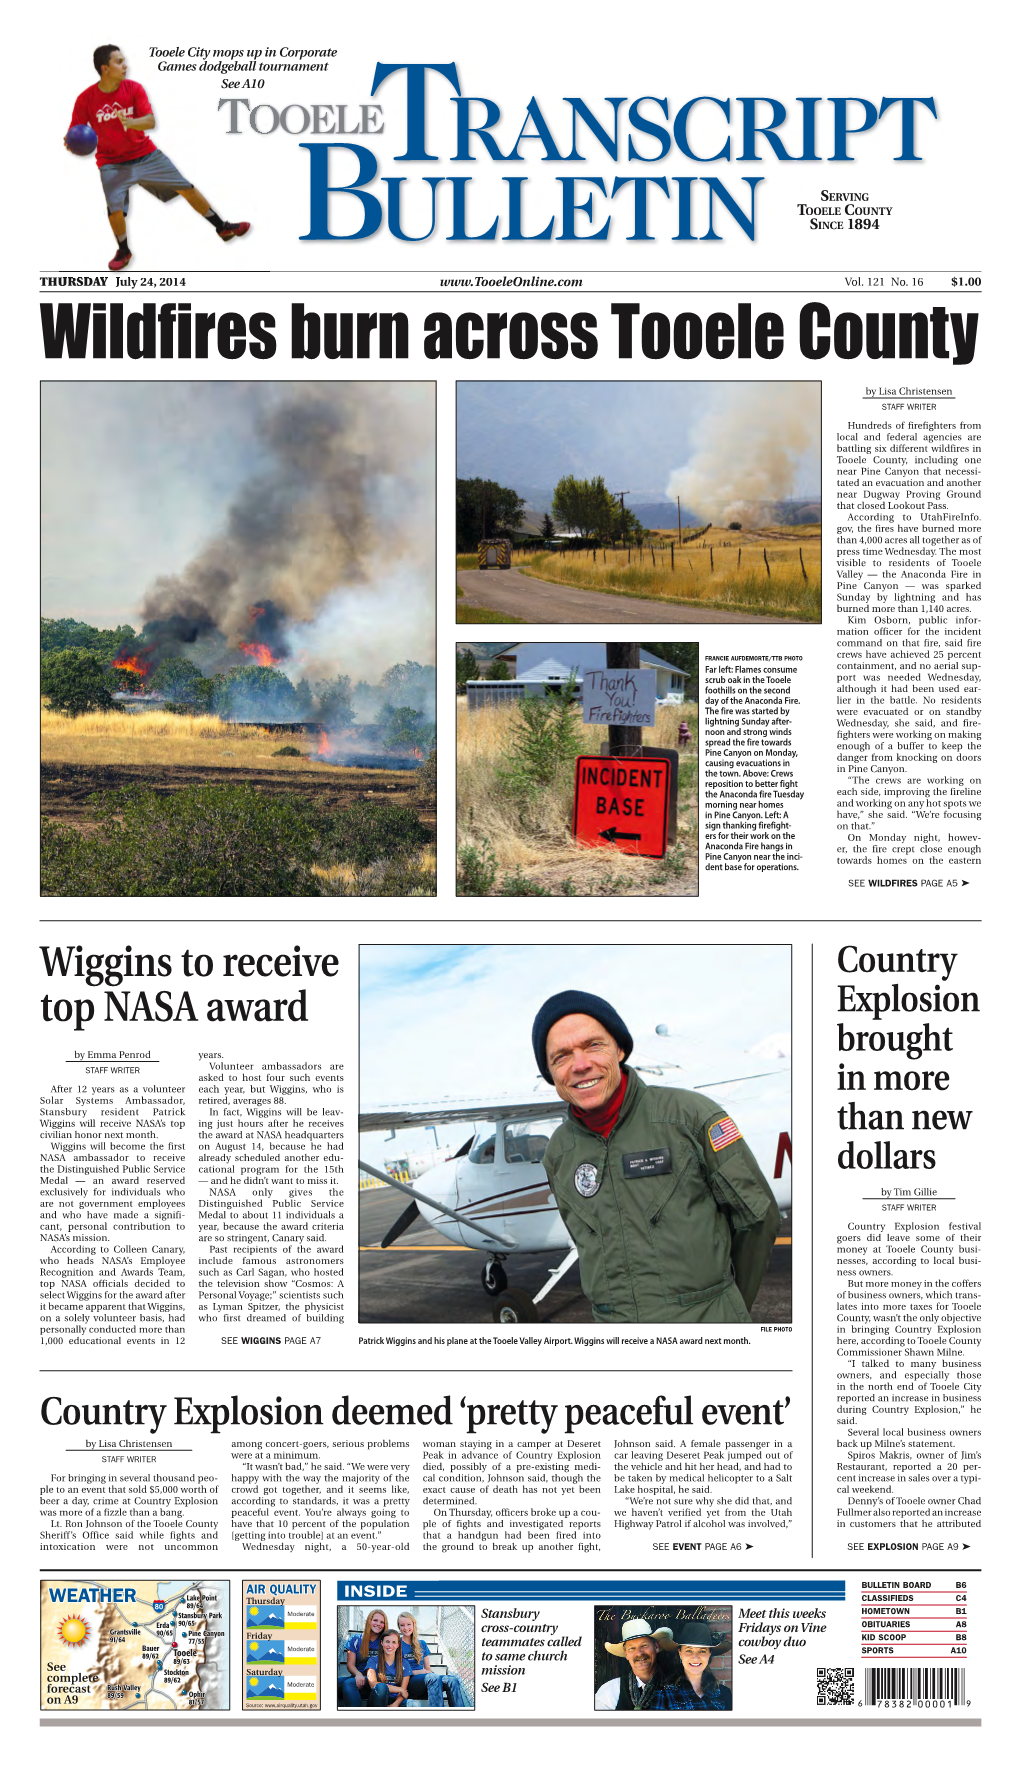 Wildfires Burn Across Tooele County by Lisa Christensen STAFF WRITER